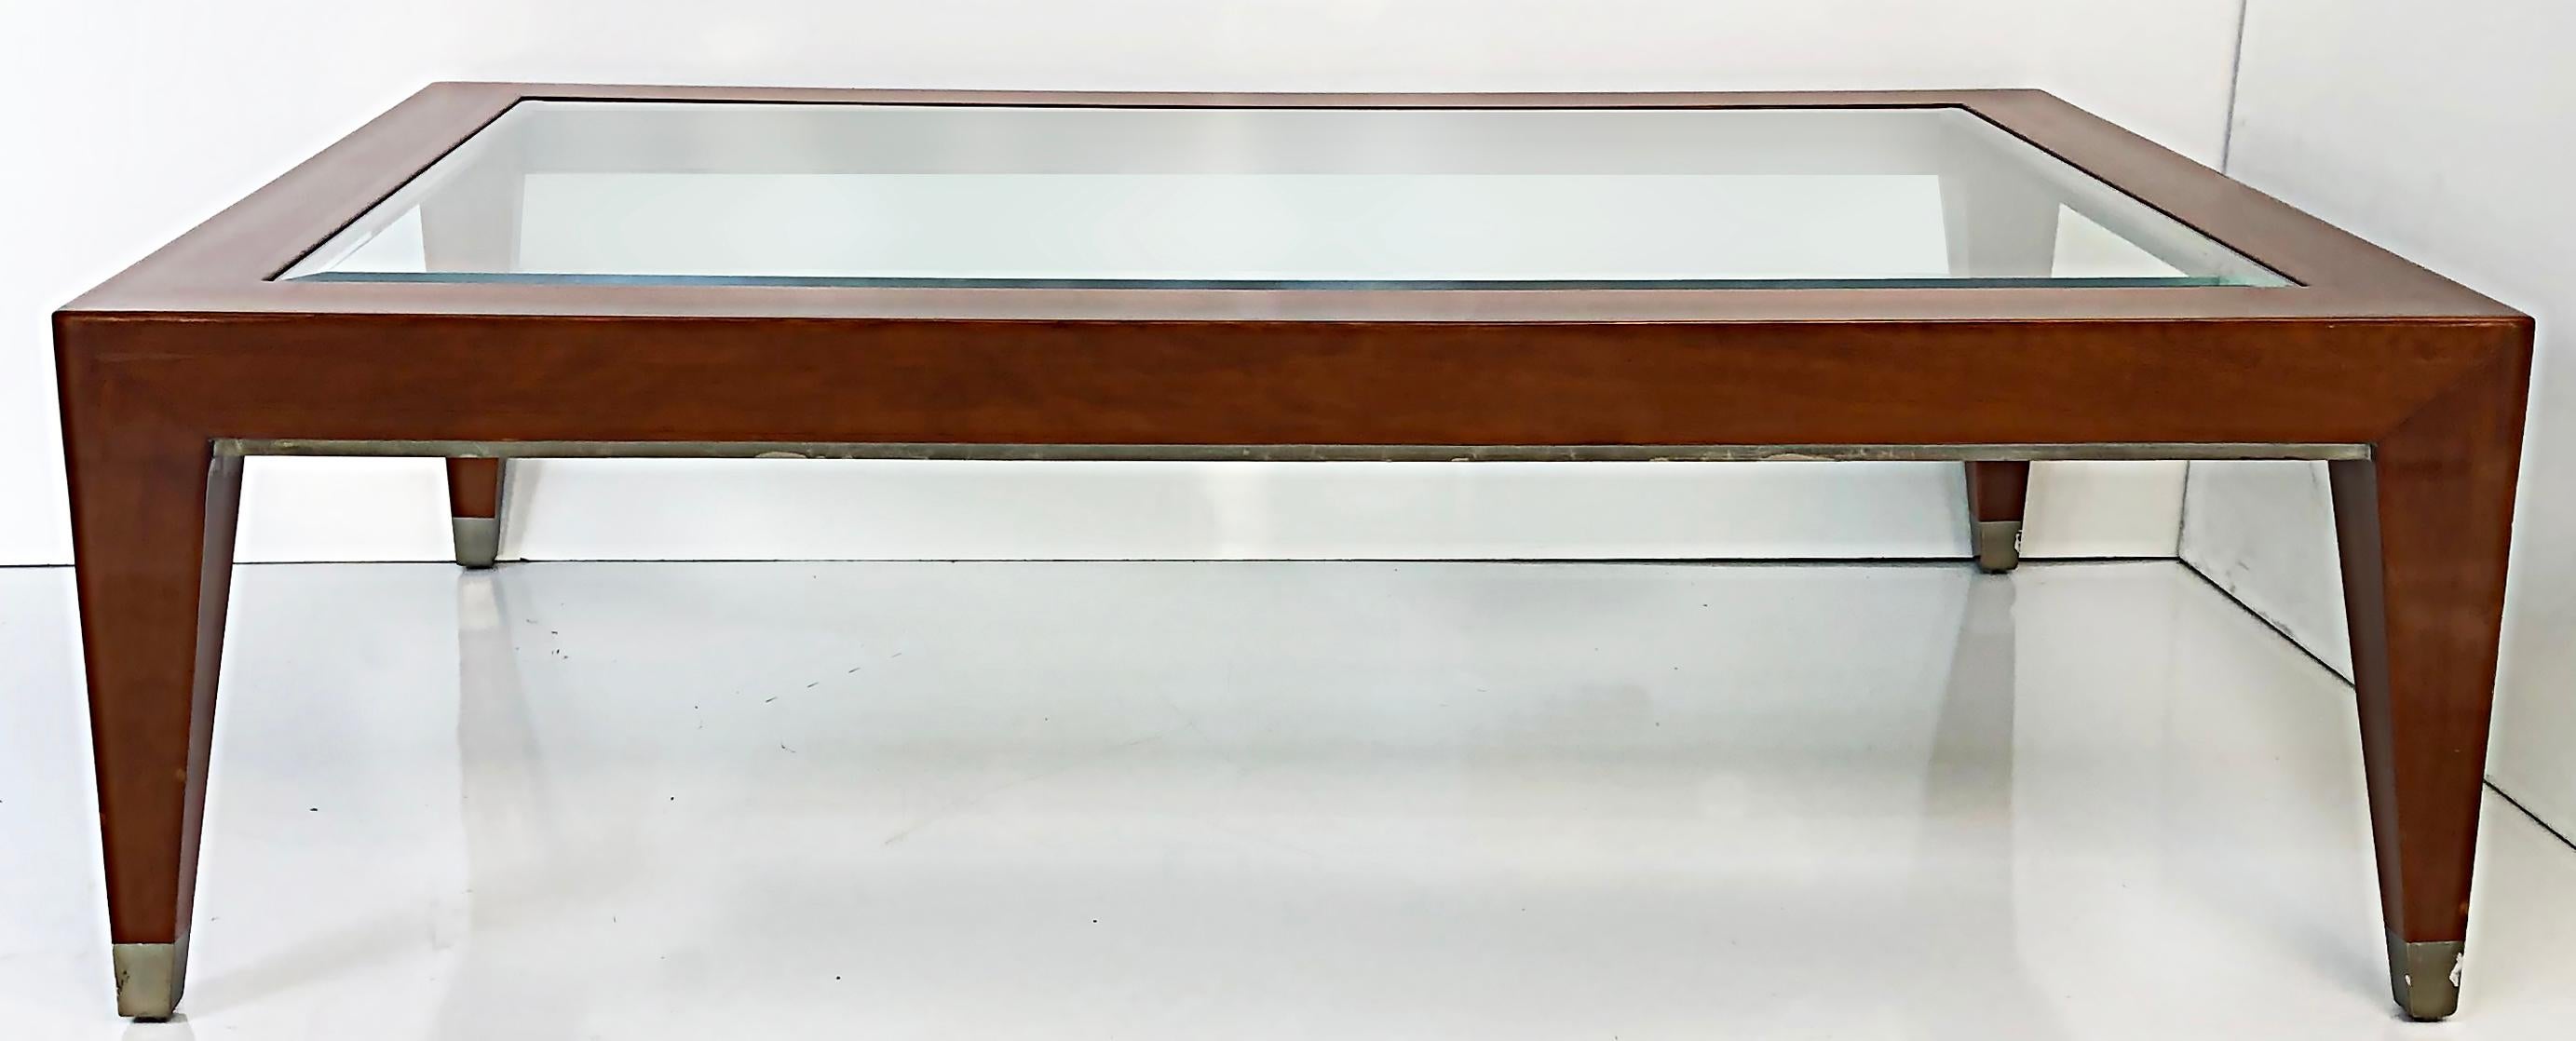 Vintage Enrique Garcel Mahogany Coffee Table with Inset Beveled Glass Top 

Offered for sale is a mahogany coffee table with an inset beveled glass top and silver leaf accents to the caps of the feet.  The table has an Enrique Garcel manufactur's